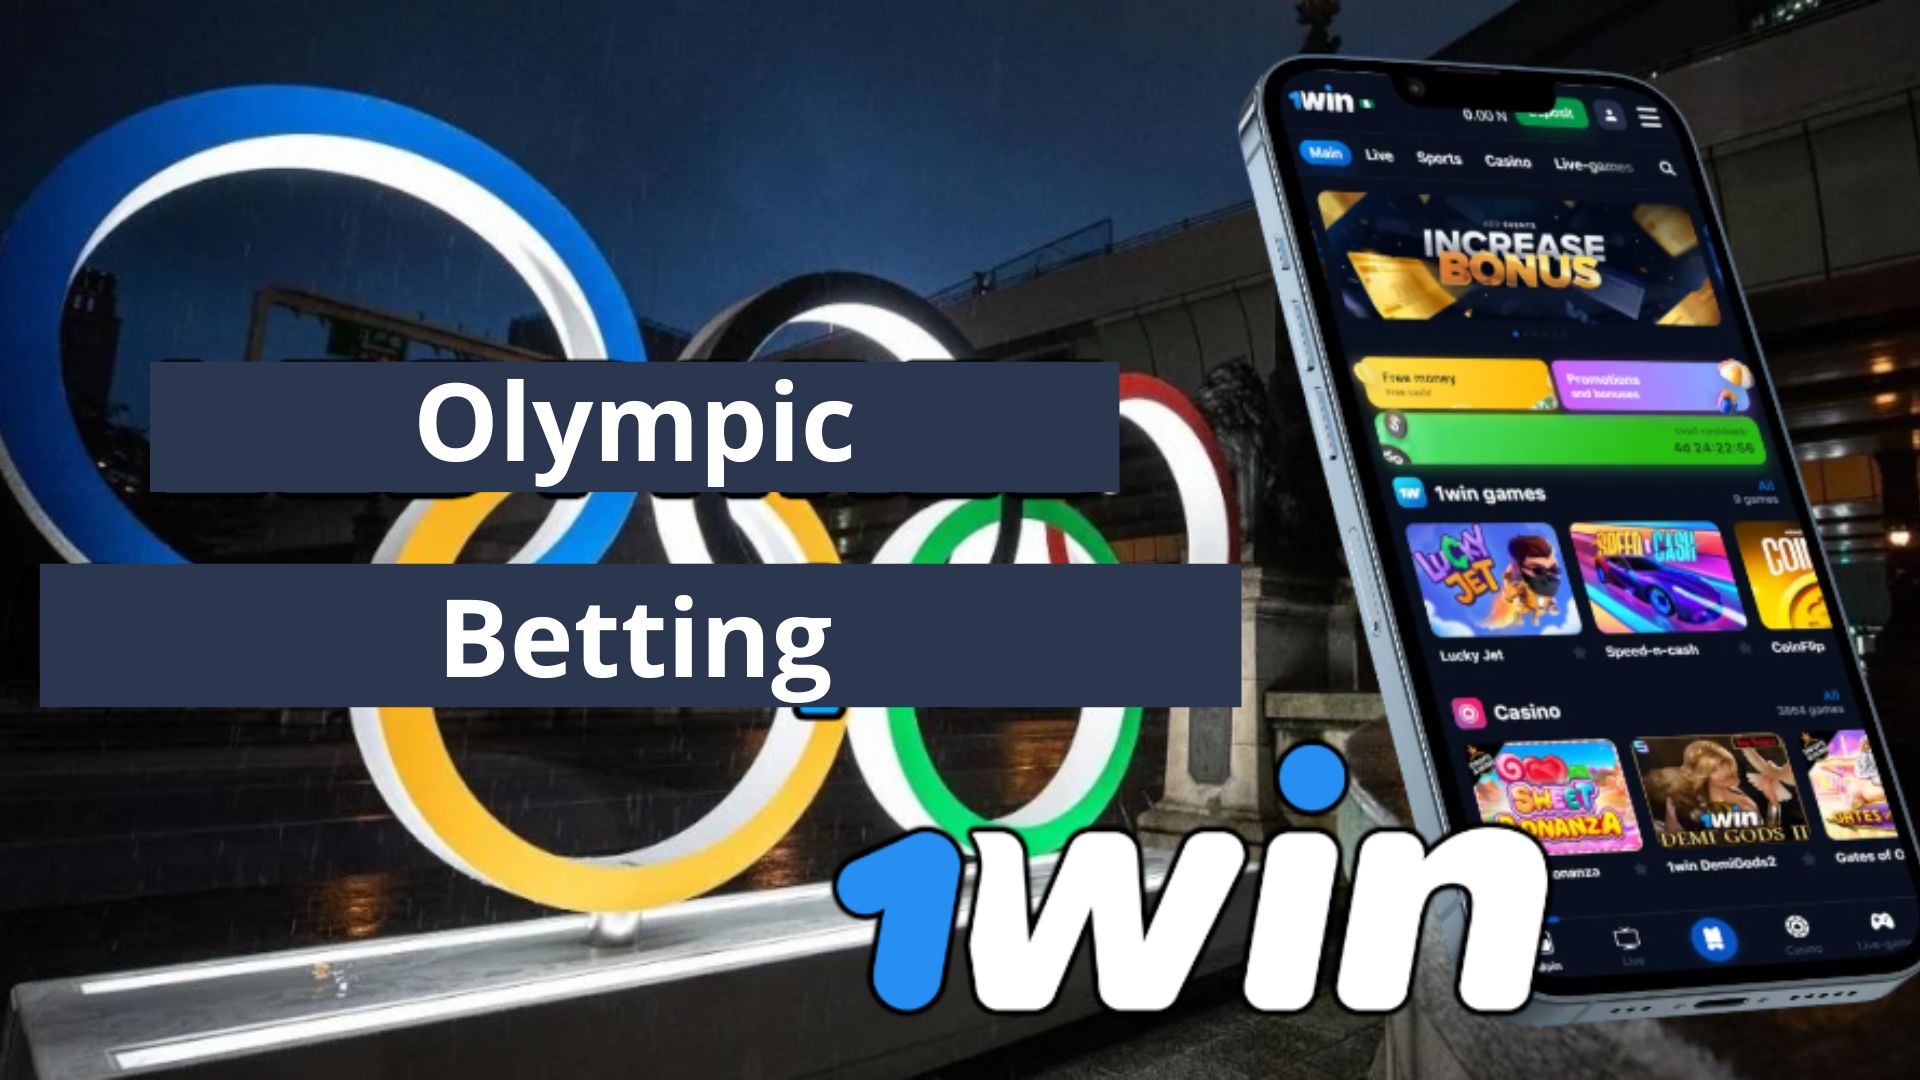 Olympic Betting: Betting On The World's Premier Sporting Event